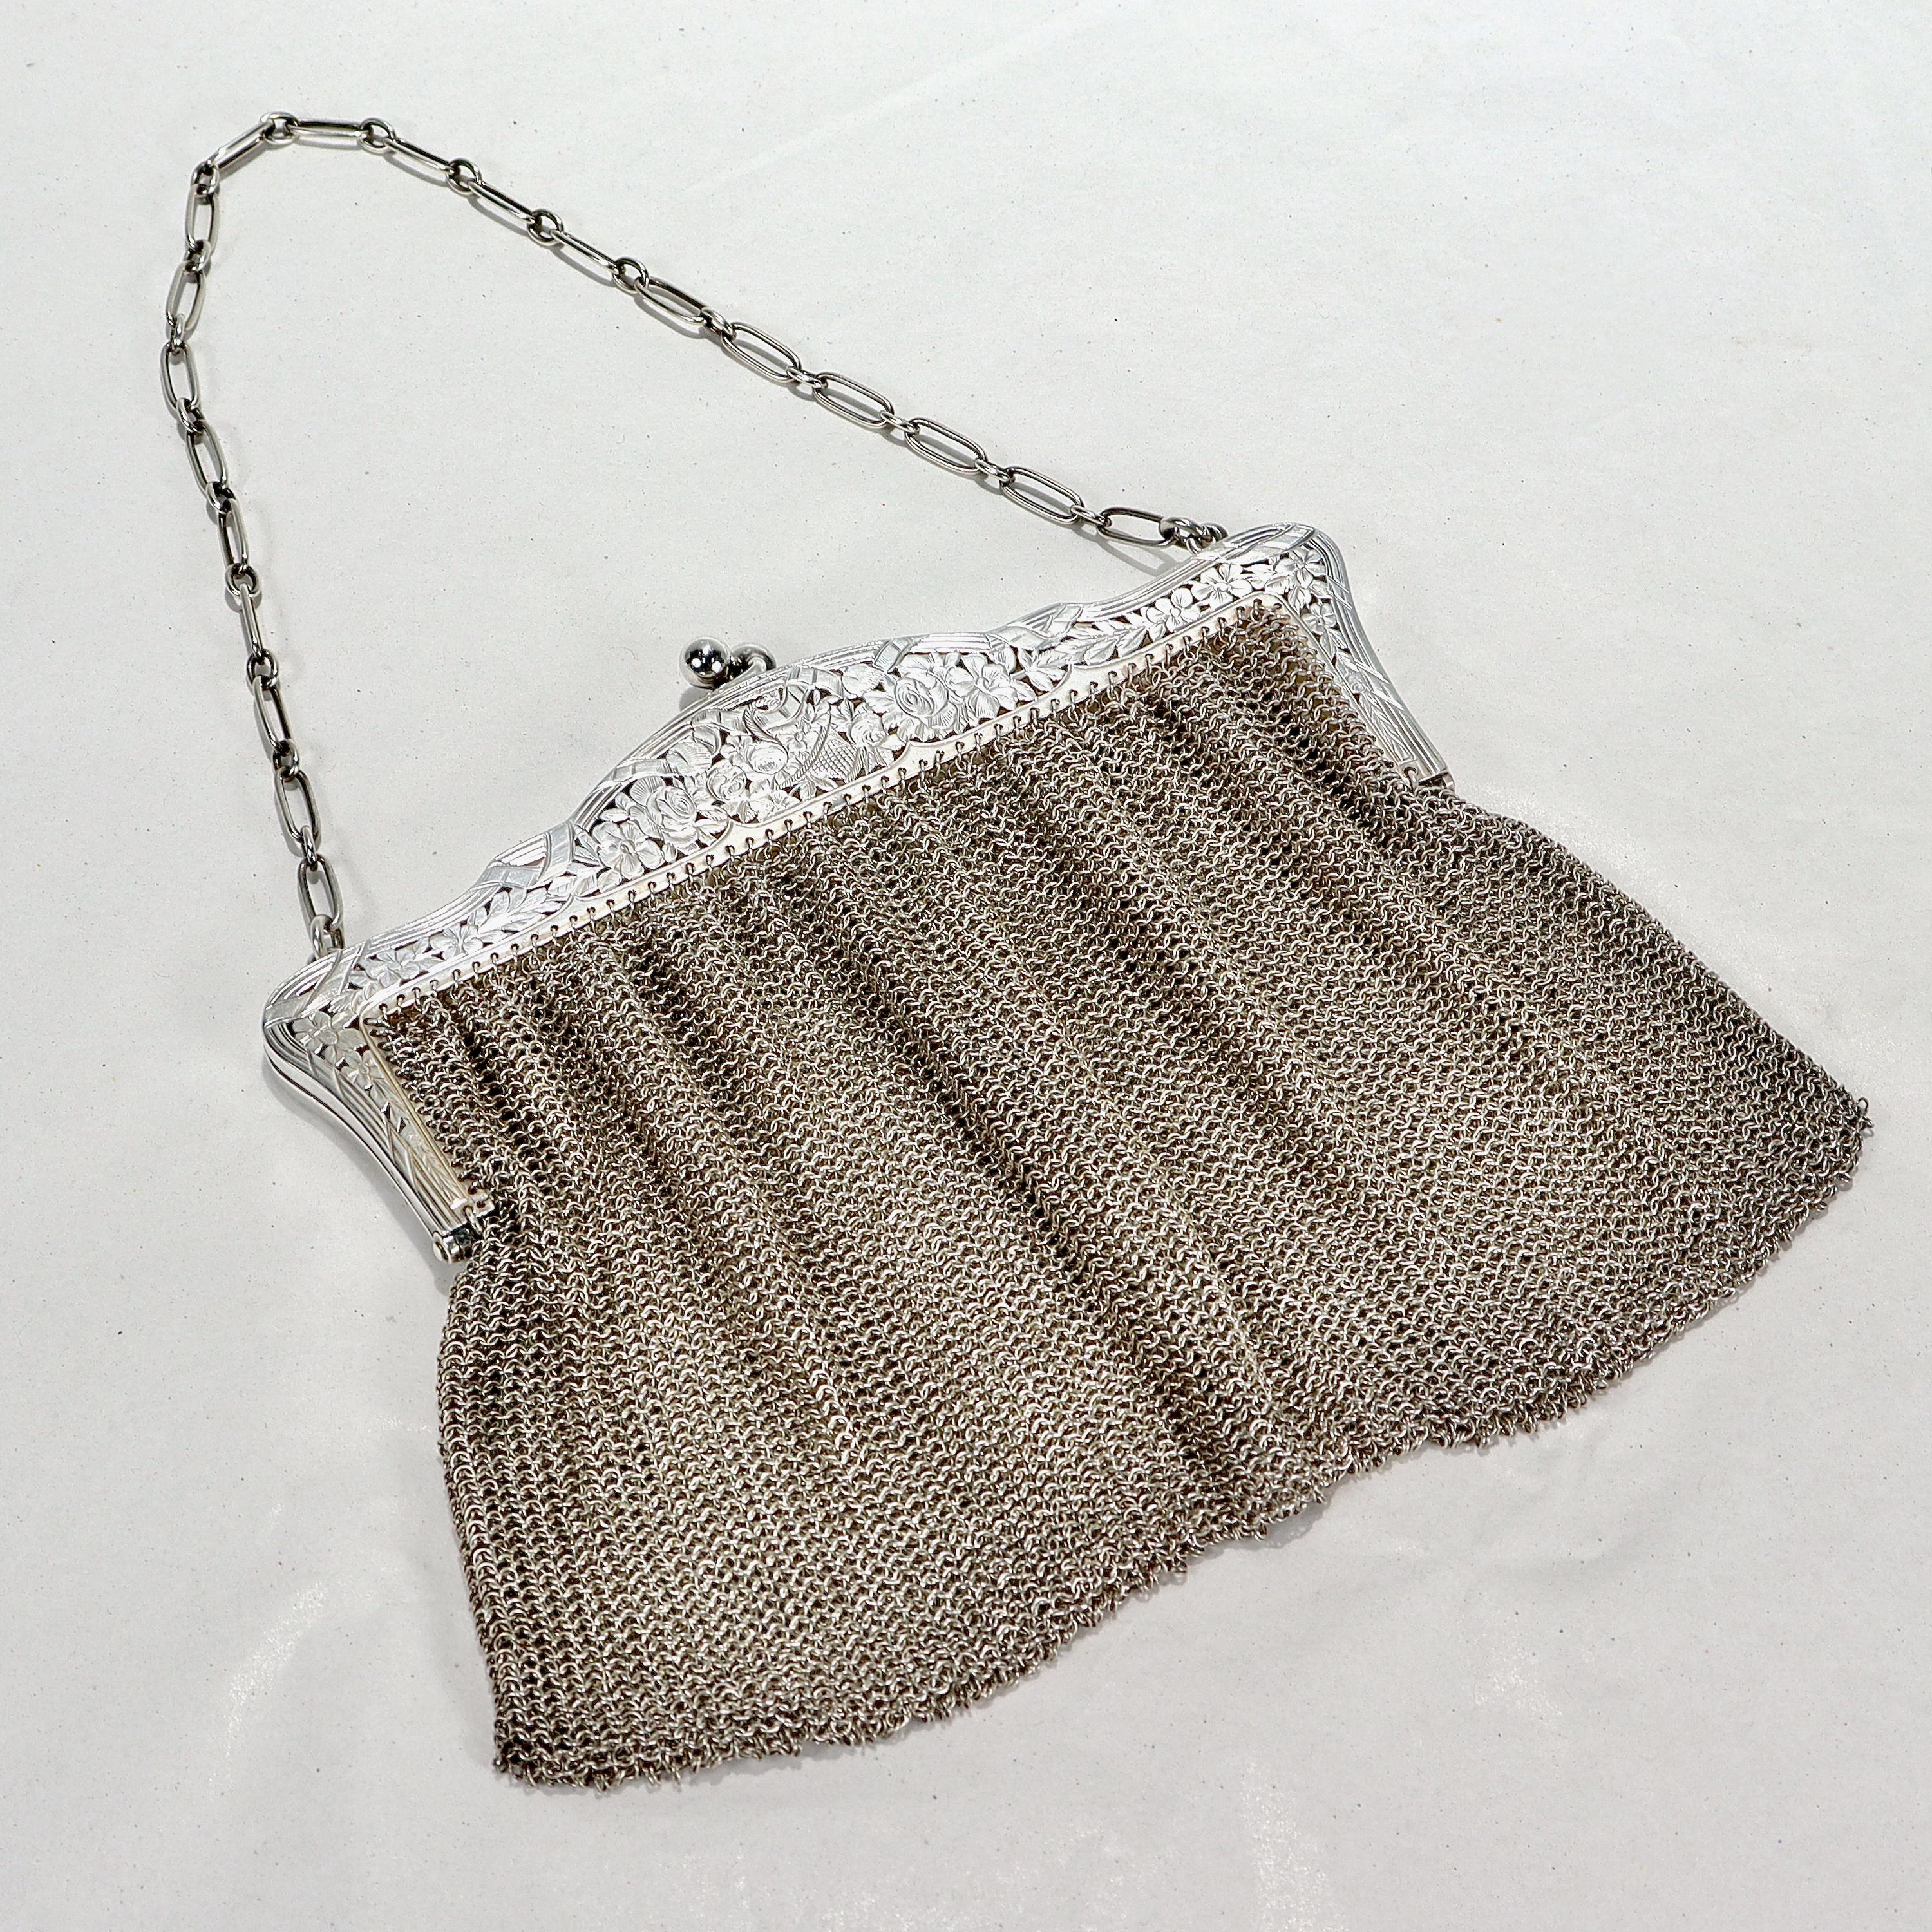 Antique Art Deco Sterling Silver Mesh Purse or Evening Bag at 1stDibs